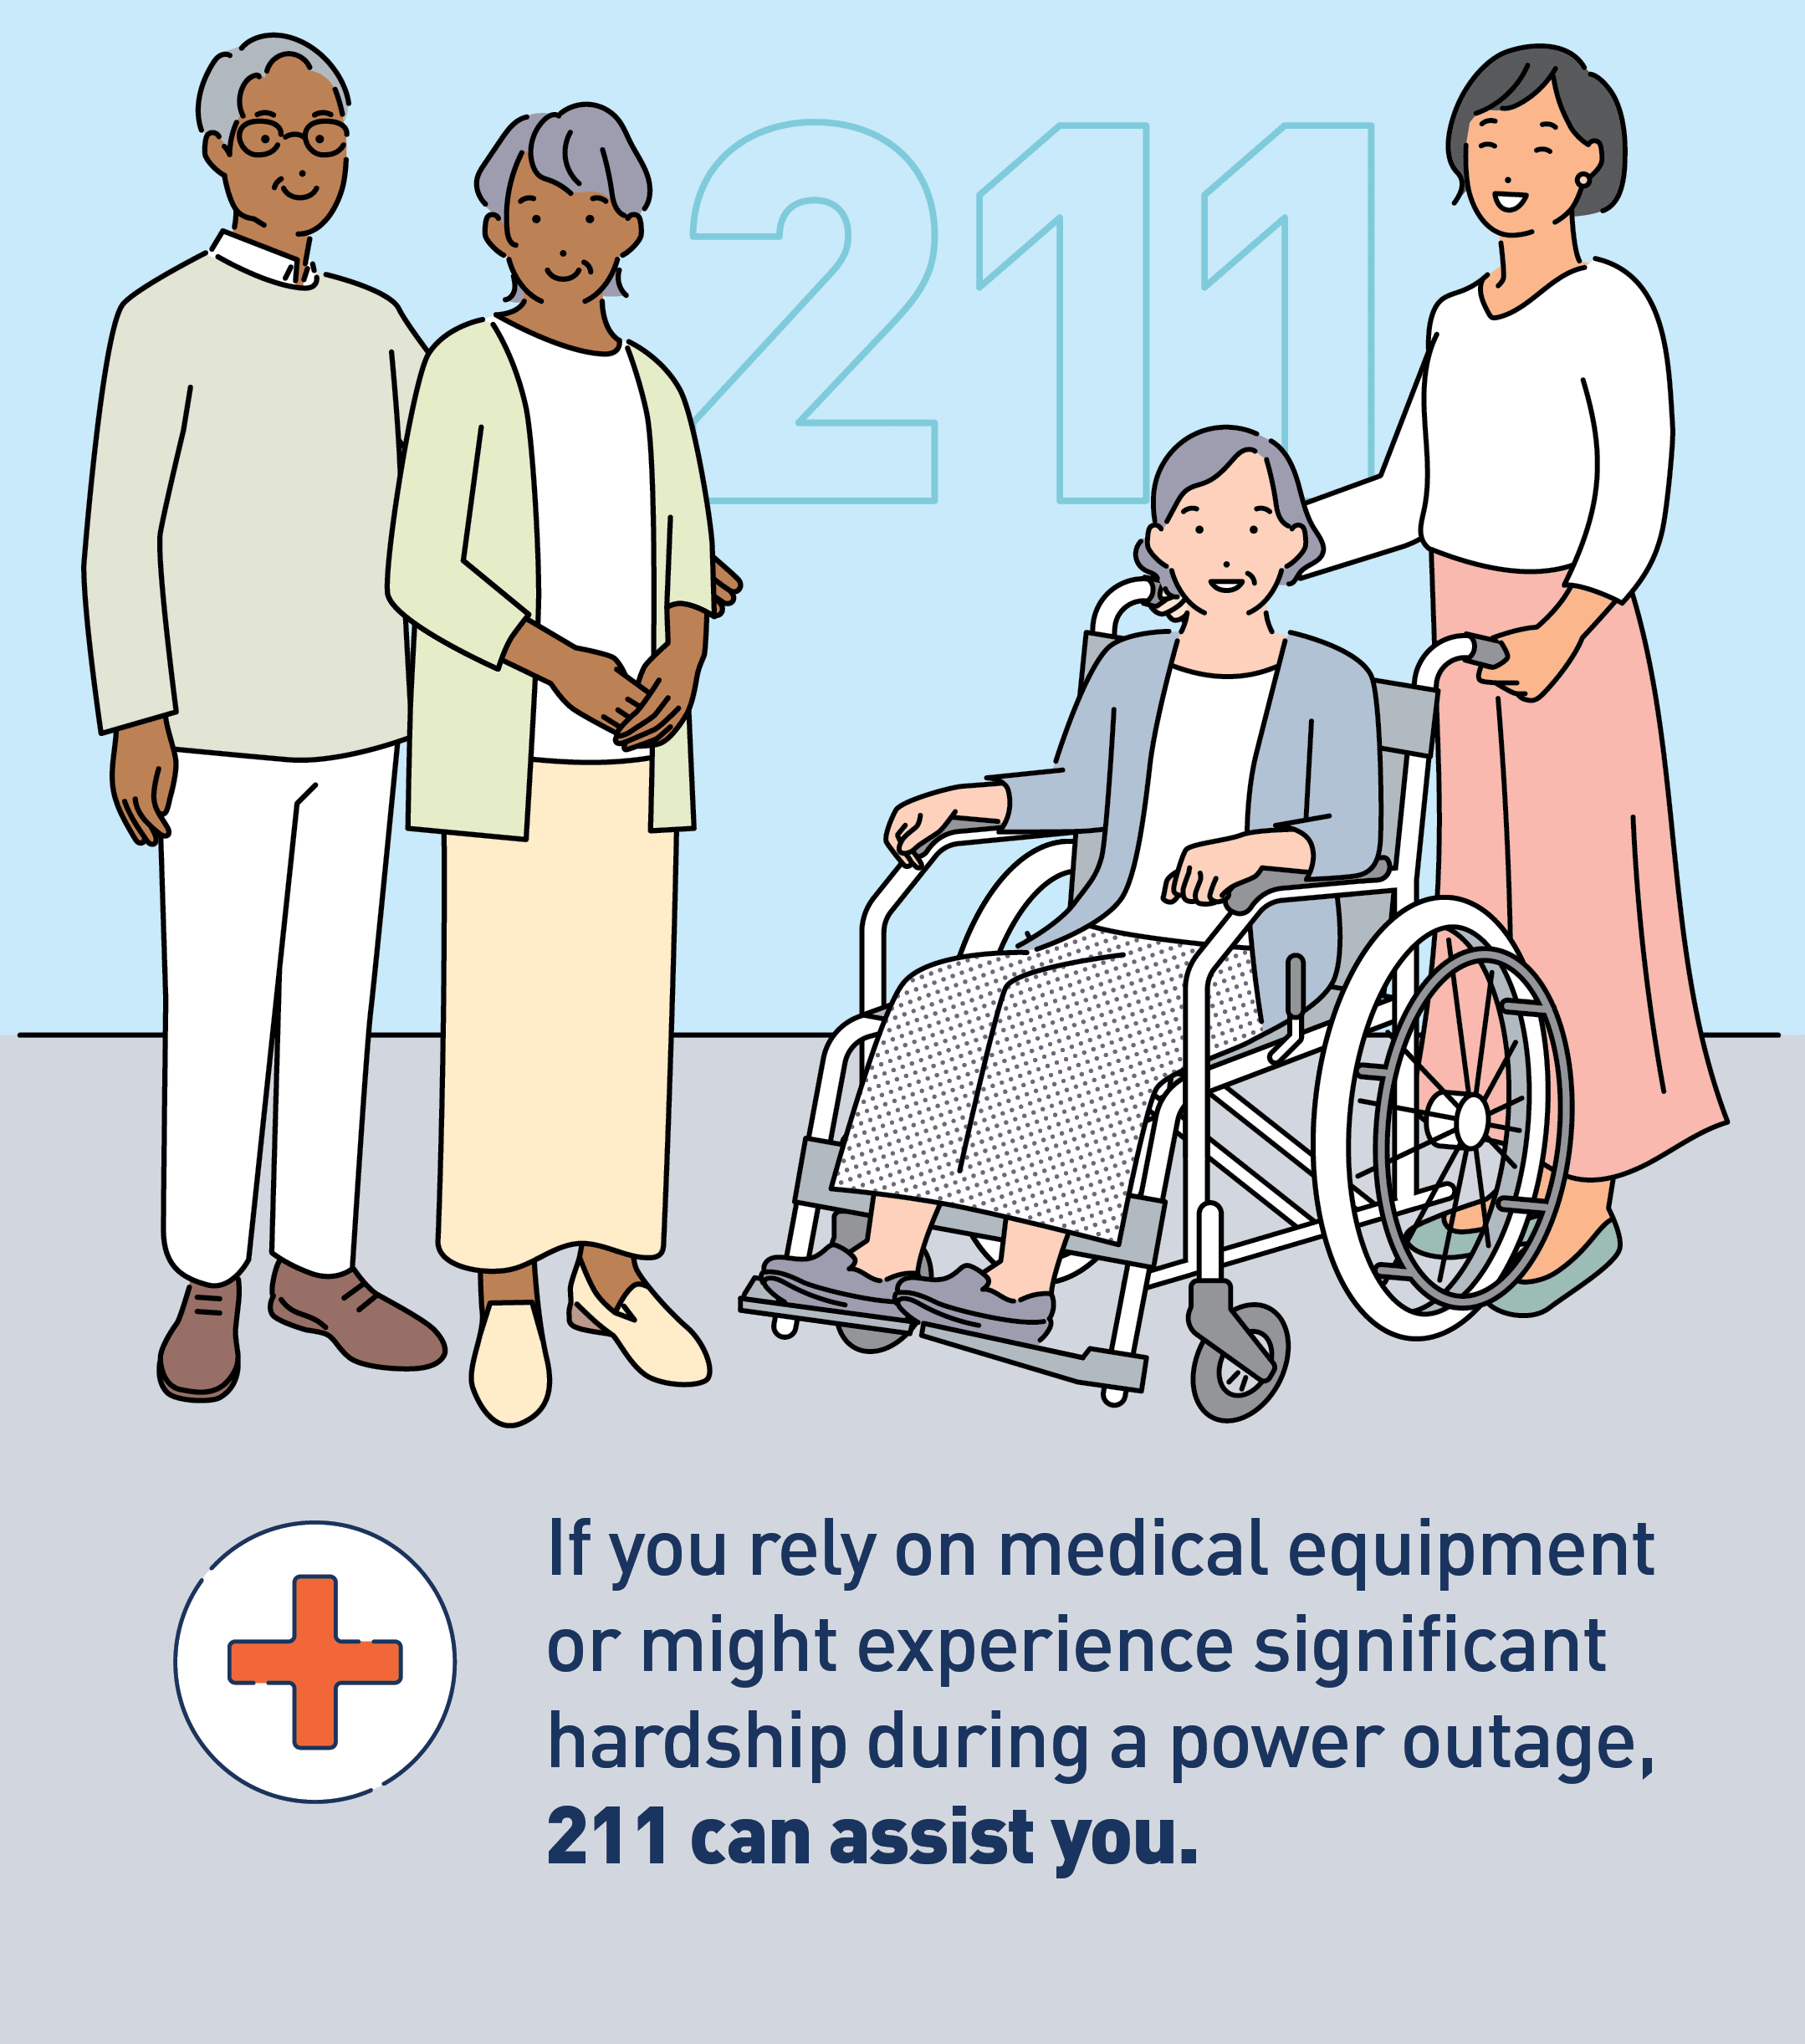 Graphic of elderly folks and individuals with disabilities. Text: If you rely on medical equipment or might experience significant hardship during a power outage, 211 can assist you.